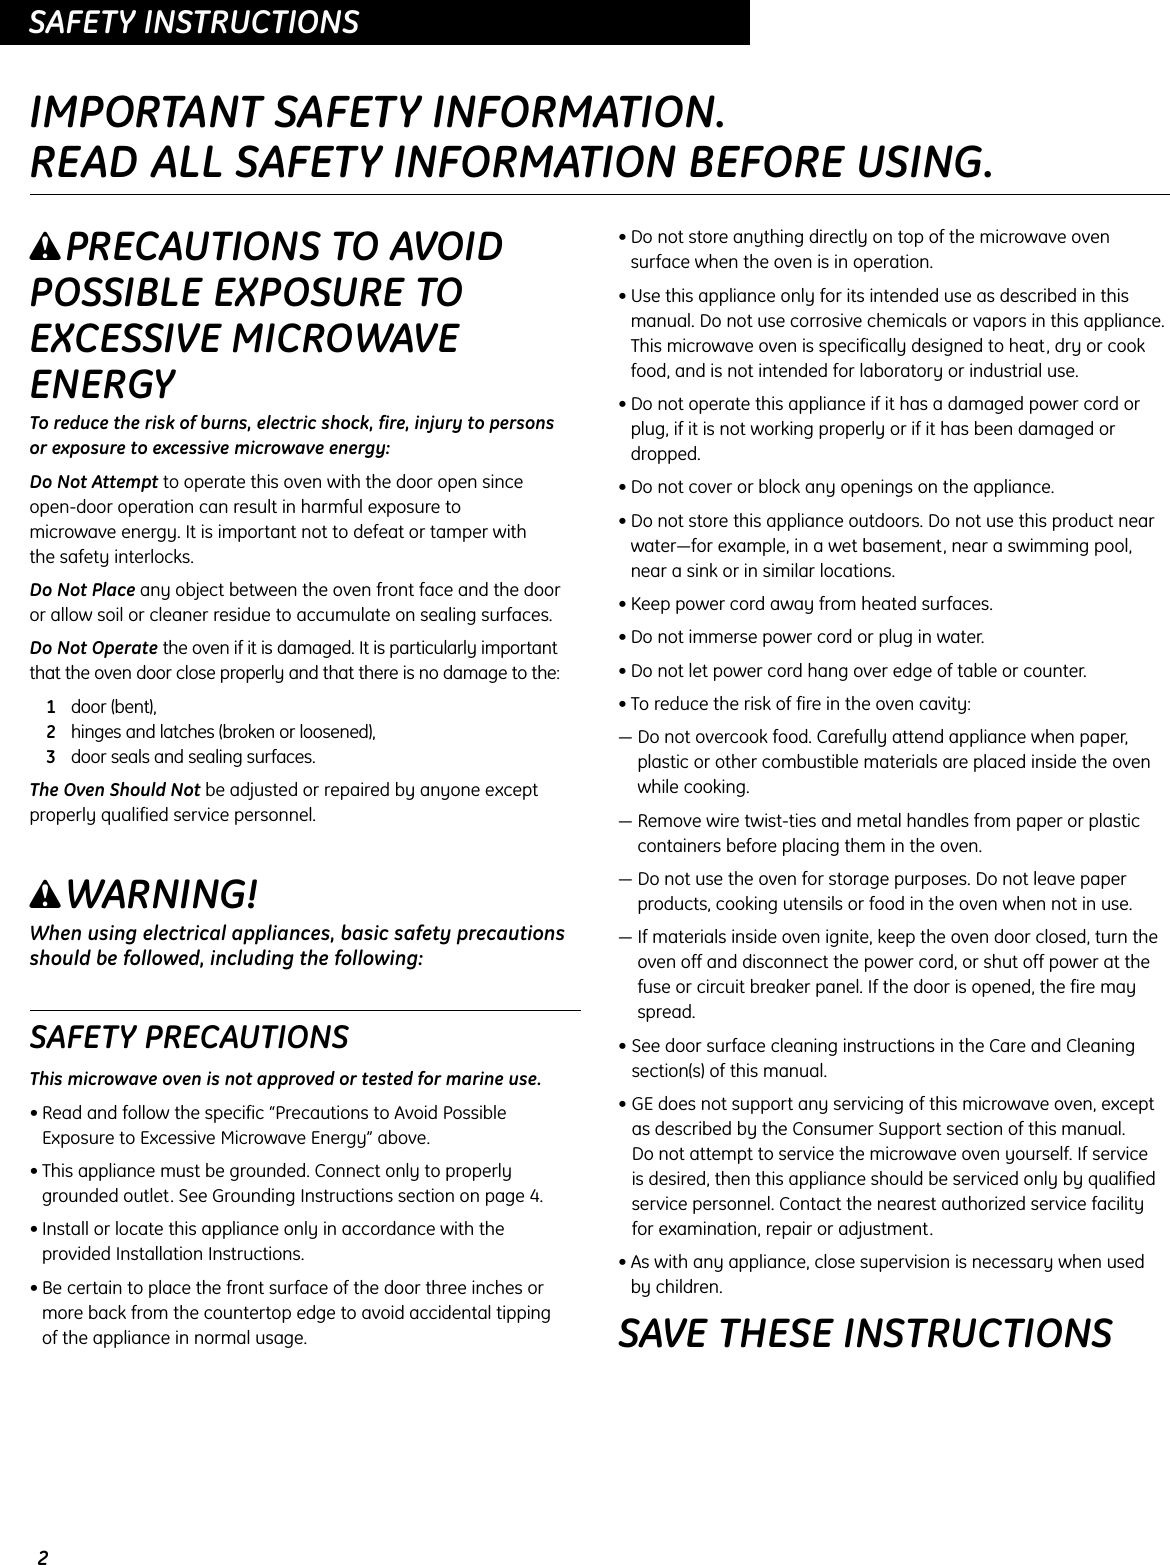 2OPERATING INSTRUCTIONSSAFETY INSTRUCTIONSIMPORTANT SAFETY INFORMATION.READ ALL SAFETY INFORMATION BEFORE USING.wPRECAUTIONS TO AVOIDPOSSIBLE EXPOSURE TOEXCESSIVE MICROWAVEENERGYTo reduce the risk of burns, electric shock, fire, injury to persons or exposure to excessive microwave energy:Do Not Attempt to operate this oven with the door open since open-door operation can result in harmful exposure to microwave energy. It is important not to defeat or tamper with the safety interlocks.Do Not Place any object between the oven front face and the door or allow soil or cleaner residue to accumulate on sealing surfaces.Do Not Operate the oven if it is damaged. It is particularly importantthat the oven door close properly and that there is no damage to the:1door (bent),2hinges and latches (broken or loosened),3door seals and sealing surfaces.The Oven Should Not be adjusted or repaired by anyone exceptproperly qualified service personnel.wWARNING!When using electrical appliances, basic safety precautionsshould be followed, including the following:SAFETY PRECAUTIONSThis microwave oven is not approved or tested for marine use.• Read and follow the specific “Precautions to Avoid PossibleExposure to Excessive Microwave Energy” above.• This appliance must be grounded. Connect only to properlygrounded outlet. See Grounding Instructions section on page 4.• Install or locate this appliance only in accordance with the provided Installation Instructions.• Be certain to place the front surface of the door three inches ormore back from the countertop edge to avoid accidental tipping of the appliance in normal usage.• Do not store anything directly on top of the microwave ovensurface when the oven is in operation.• Use this appliance only for its intended use as described in thismanual. Do not use corrosive chemicals or vapors in this appliance.This microwave oven is specifically designed to heat, dry or cookfood, and is not intended for laboratory or industrial use.• Do not operate this appliance if it has a damaged power cord orplug, if it is not working properly or if it has been damaged ordropped.• Do not cover or block any openings on the appliance.• Do not store this appliance outdoors. Do not use this product nearwater—for example, in a wet basement, near a swimming pool,near a sink or in similar locations.• Keep power cord away from heated surfaces.• Do not immerse power cord or plug in water.• Do not let power cord hang over edge of table or counter.• To reduce the risk of fire in the oven cavity:— Do not overcook food. Carefully attend appliance when paper,plastic or other combustible materials are placed inside the ovenwhile cooking.— Remove wire twist-ties and metal handles from paper or plasticcontainers before placing them in the oven.— Do not use the oven for storage purposes. Do not leave paperproducts, cooking utensils or food in the oven when not in use.— If materials inside oven ignite, keep the oven door closed, turn theoven off and disconnect the power cord, or shut off power at thefuse or circuit breaker panel. If the door is opened, the fire mayspread.• See door surface cleaning instructions in the Care and Cleaningsection(s) of this manual.• GE does not support any servicing of this microwave oven, exceptas described by the Consumer Support section of this manual. Do not attempt to service the microwave oven yourself. If service is desired, then this appliance should be serviced only by qualifiedservice personnel. Contact the nearest authorized service facilityfor examination, repair or adjustment.• As with any appliance, close supervision is necessary when used by children.SAVE THESE INSTRUCTIONS